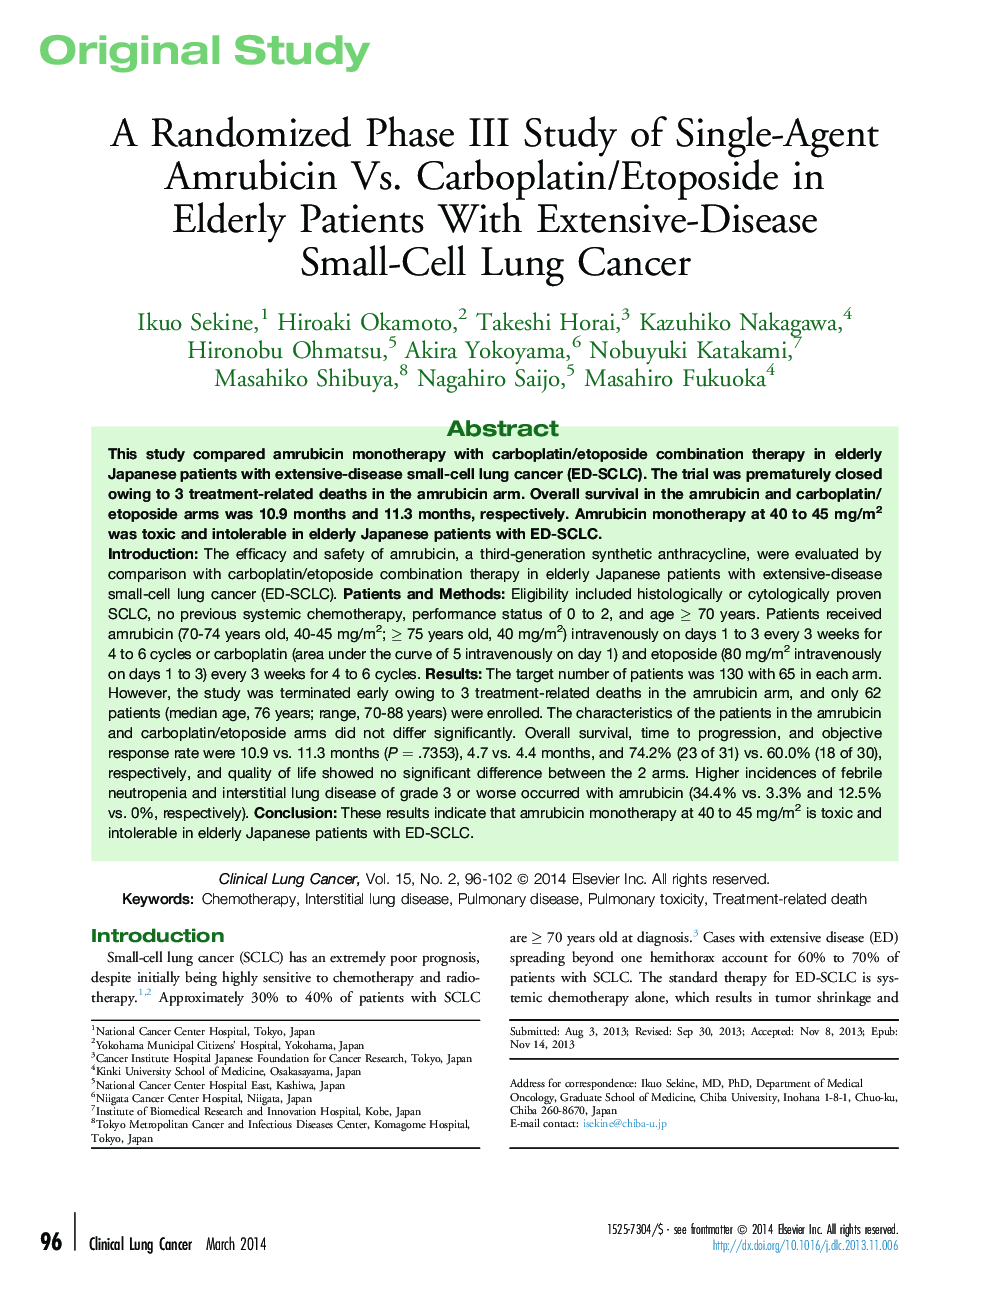 A Randomized Phase III Study of Single-Agent Amrubicin Vs. Carboplatin/Etoposide in Elderly Patients With Extensive-Disease Small-Cell Lung Cancer